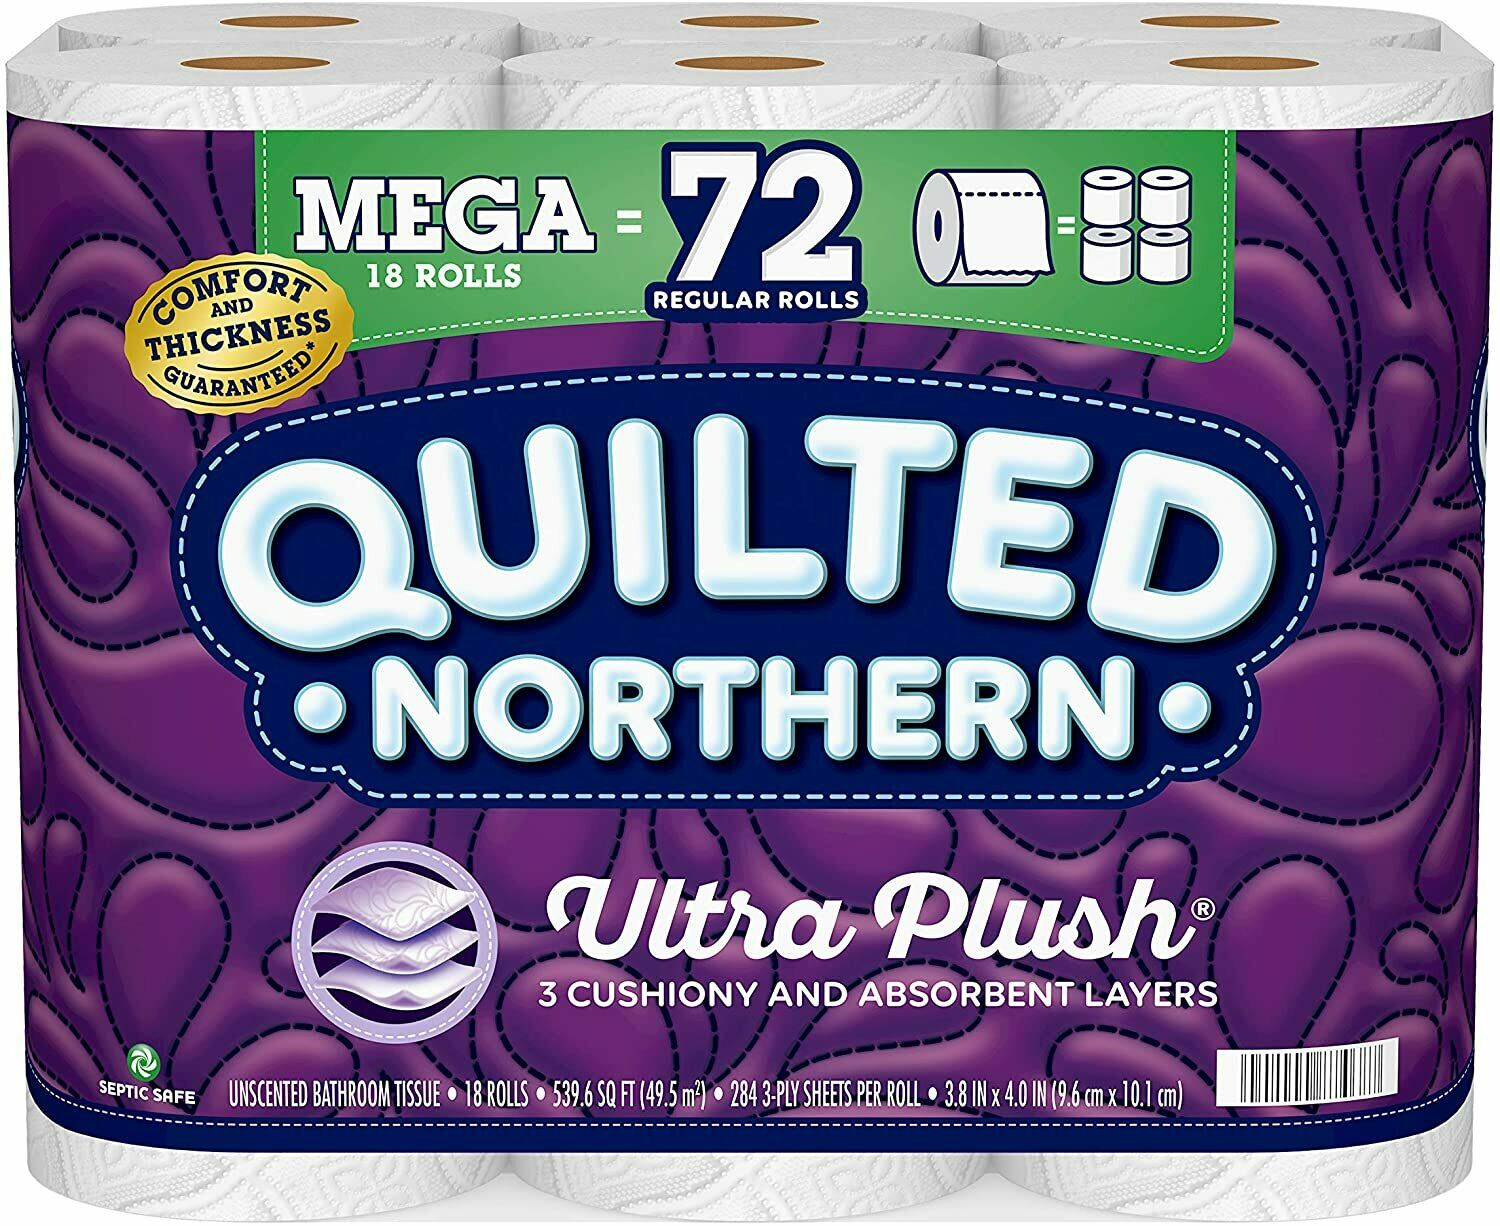 Quilted Northern Ultra Plush Toilet Paper, 18 Mega 72 Regular Rolls, 3-Ply